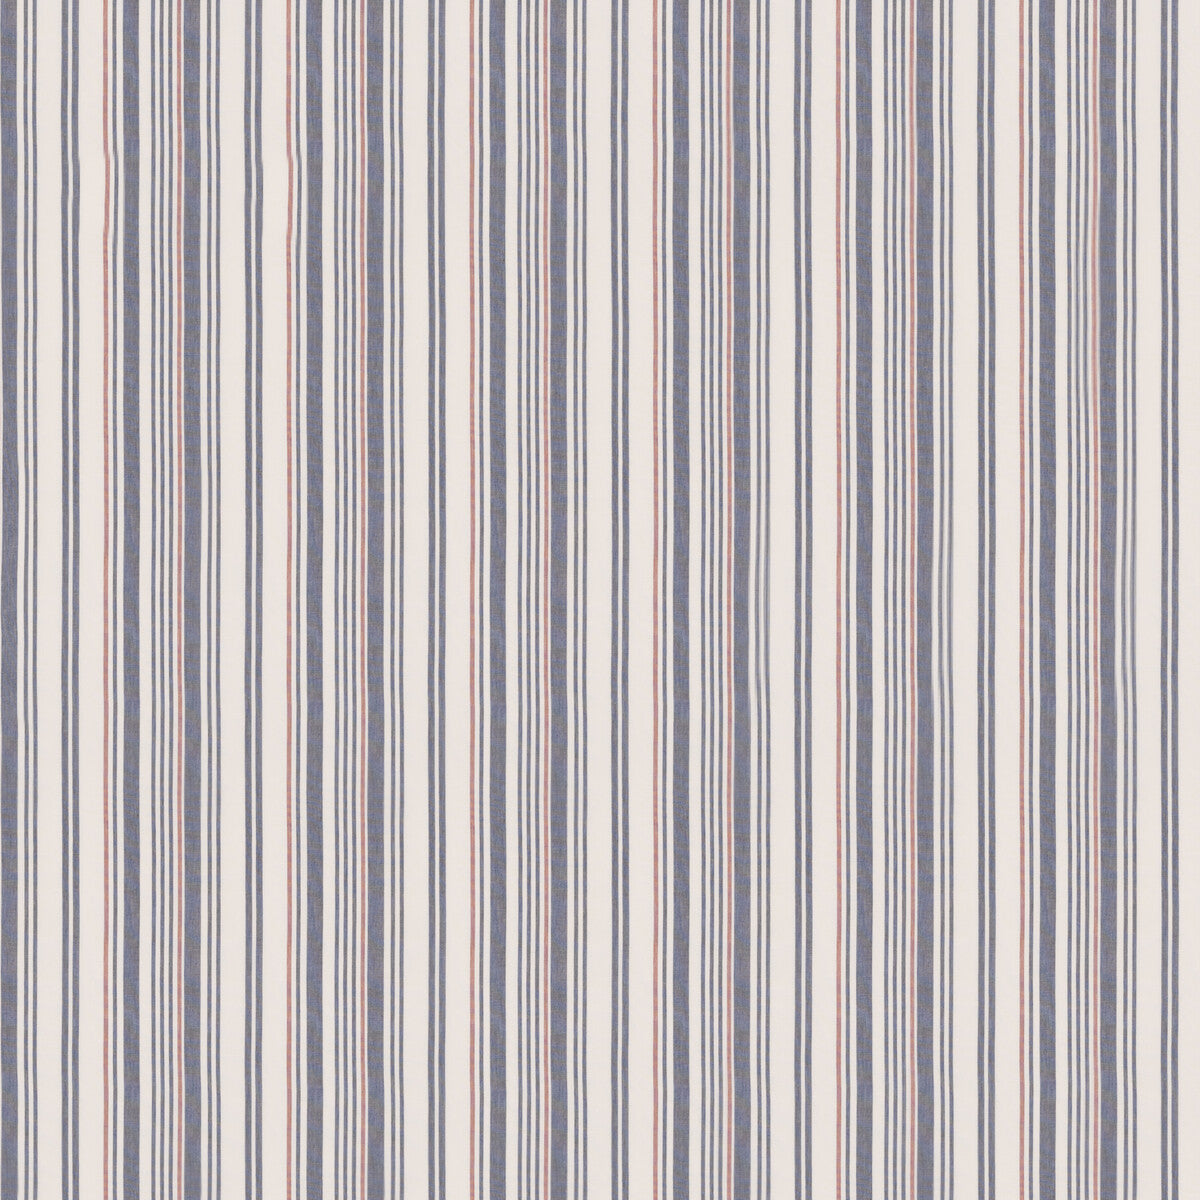 Spinnaker Stripe fabric in indigo/red color - pattern FD814.G103.0 - by Mulberry in the Westerly Stripes collection